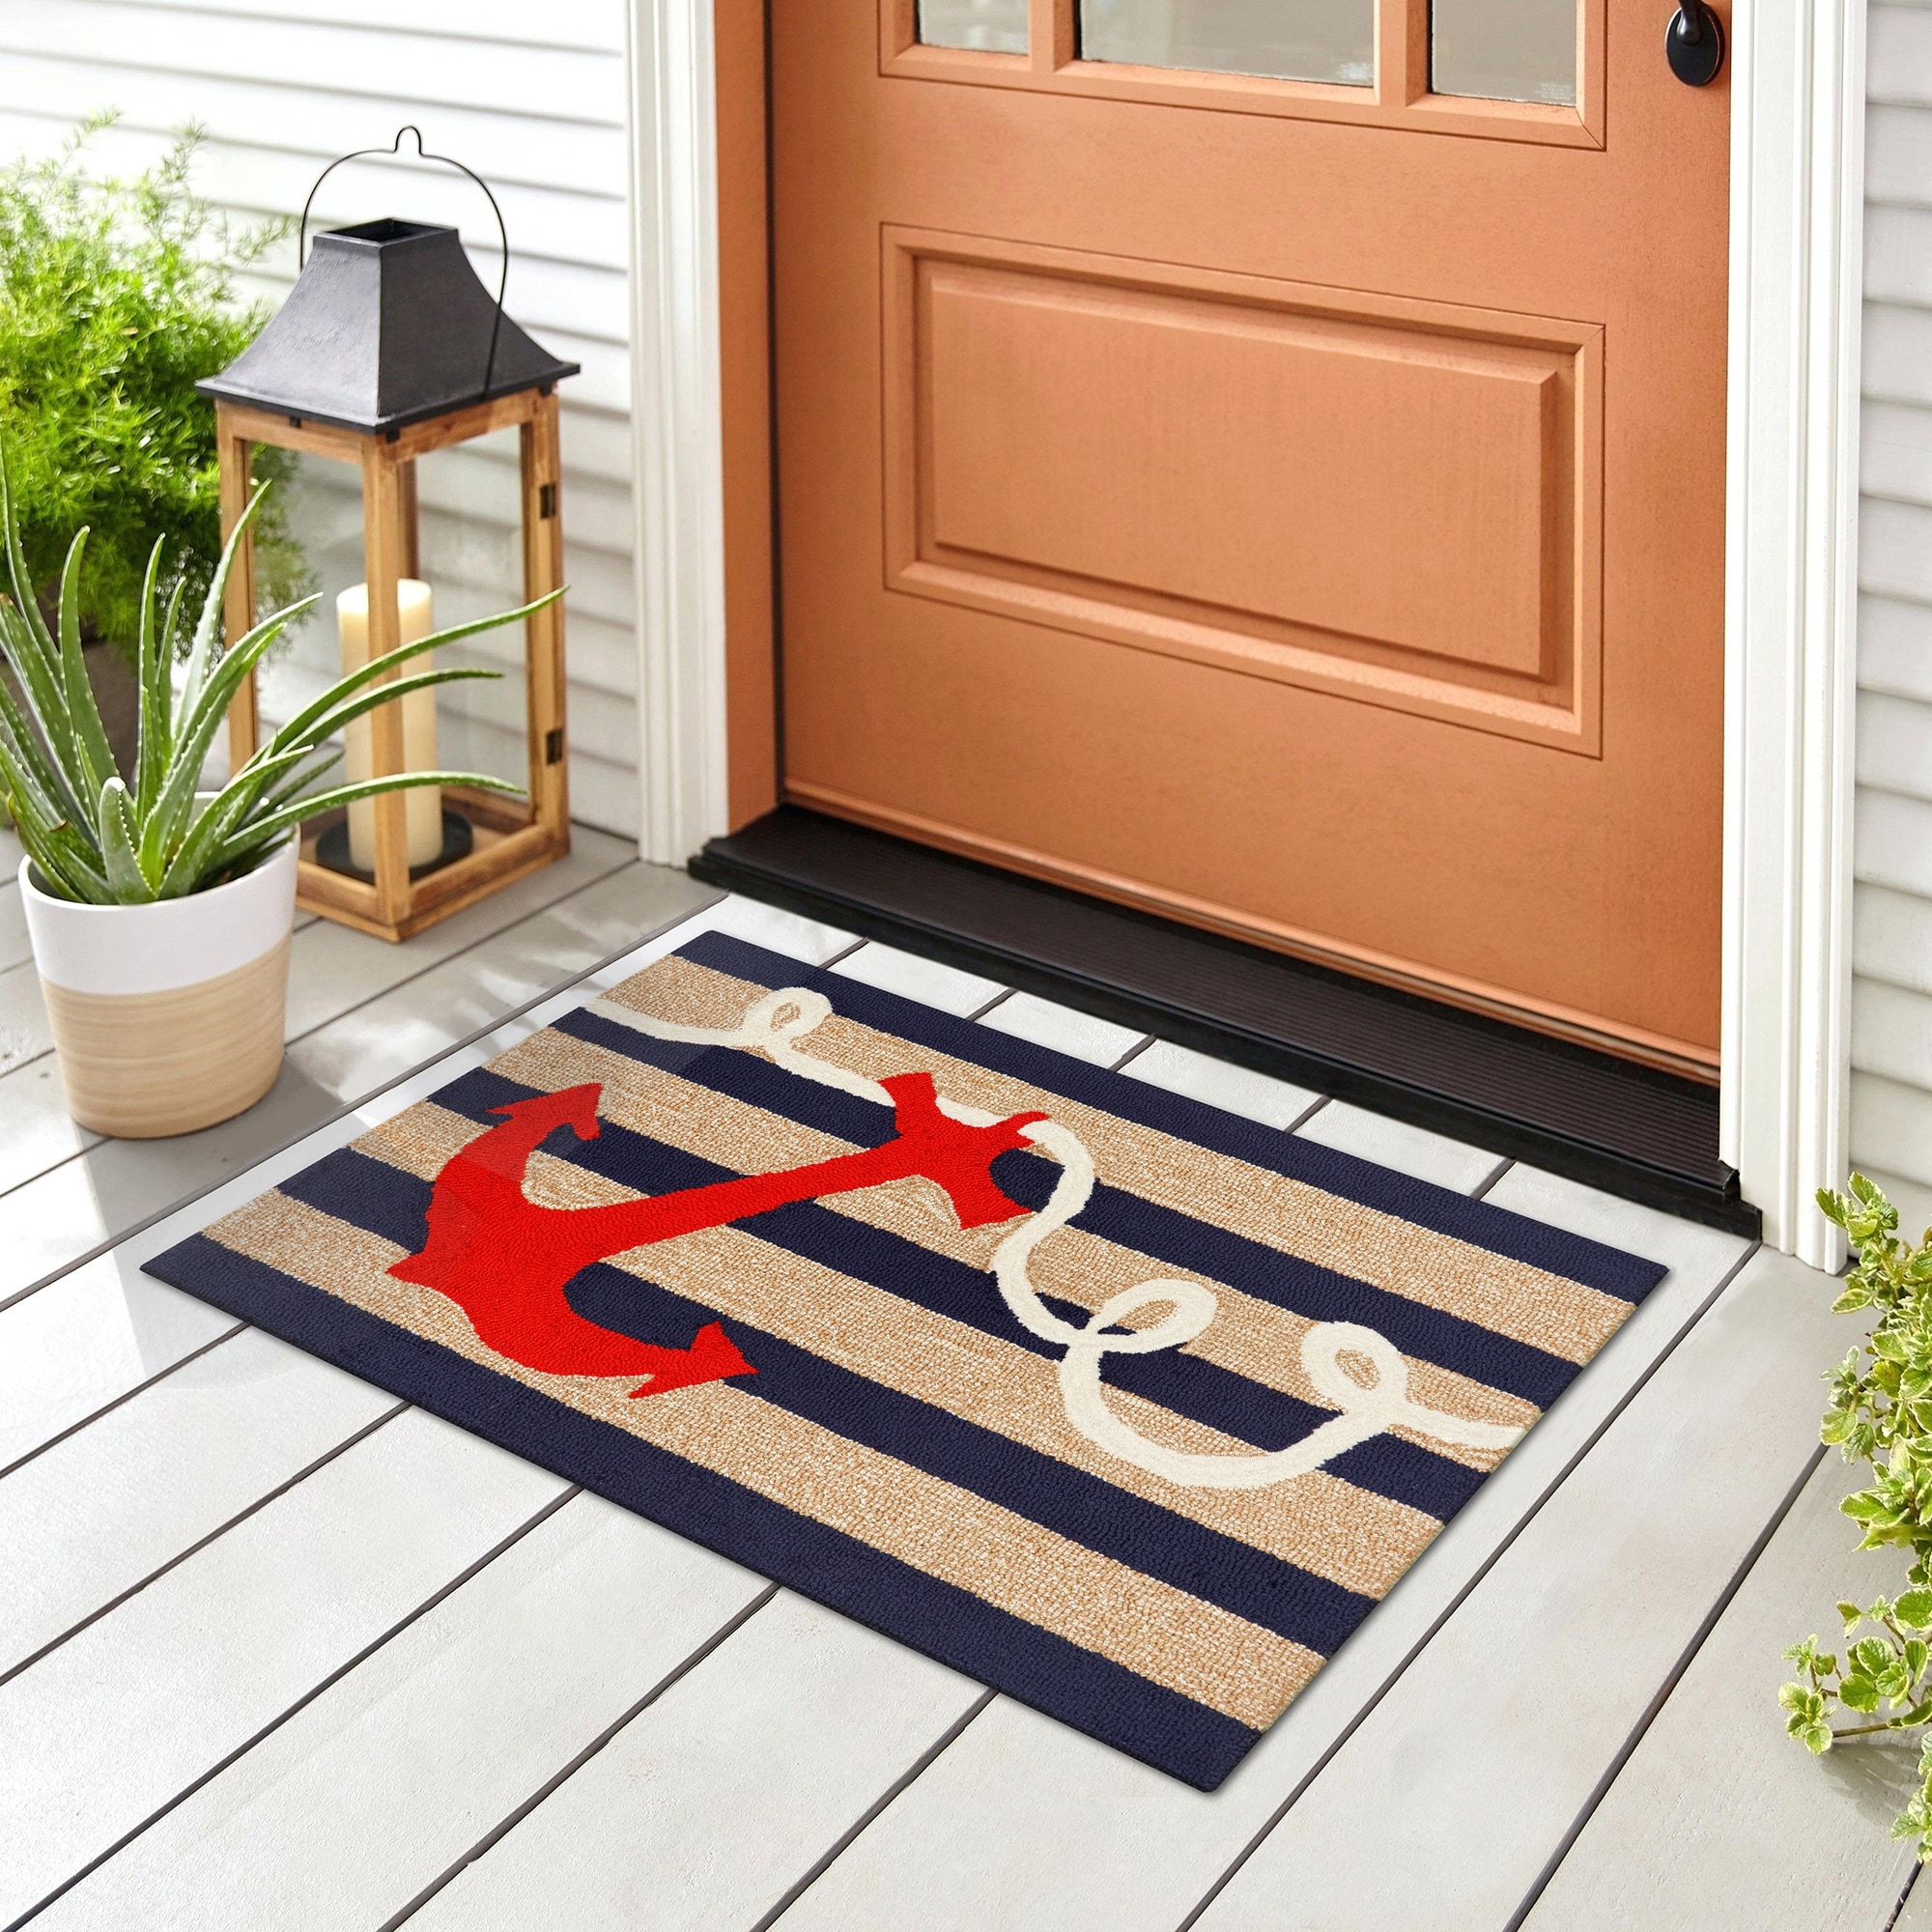 https://ak1.ostkcdn.com/images/products/is/images/direct/0591664d915cb0709de62038d695e710ae400fee/Liora-Manne-Frontporch-Anchor-Indoor-Outdoor-Rug-Navy-2%276-x-4%27.jpg